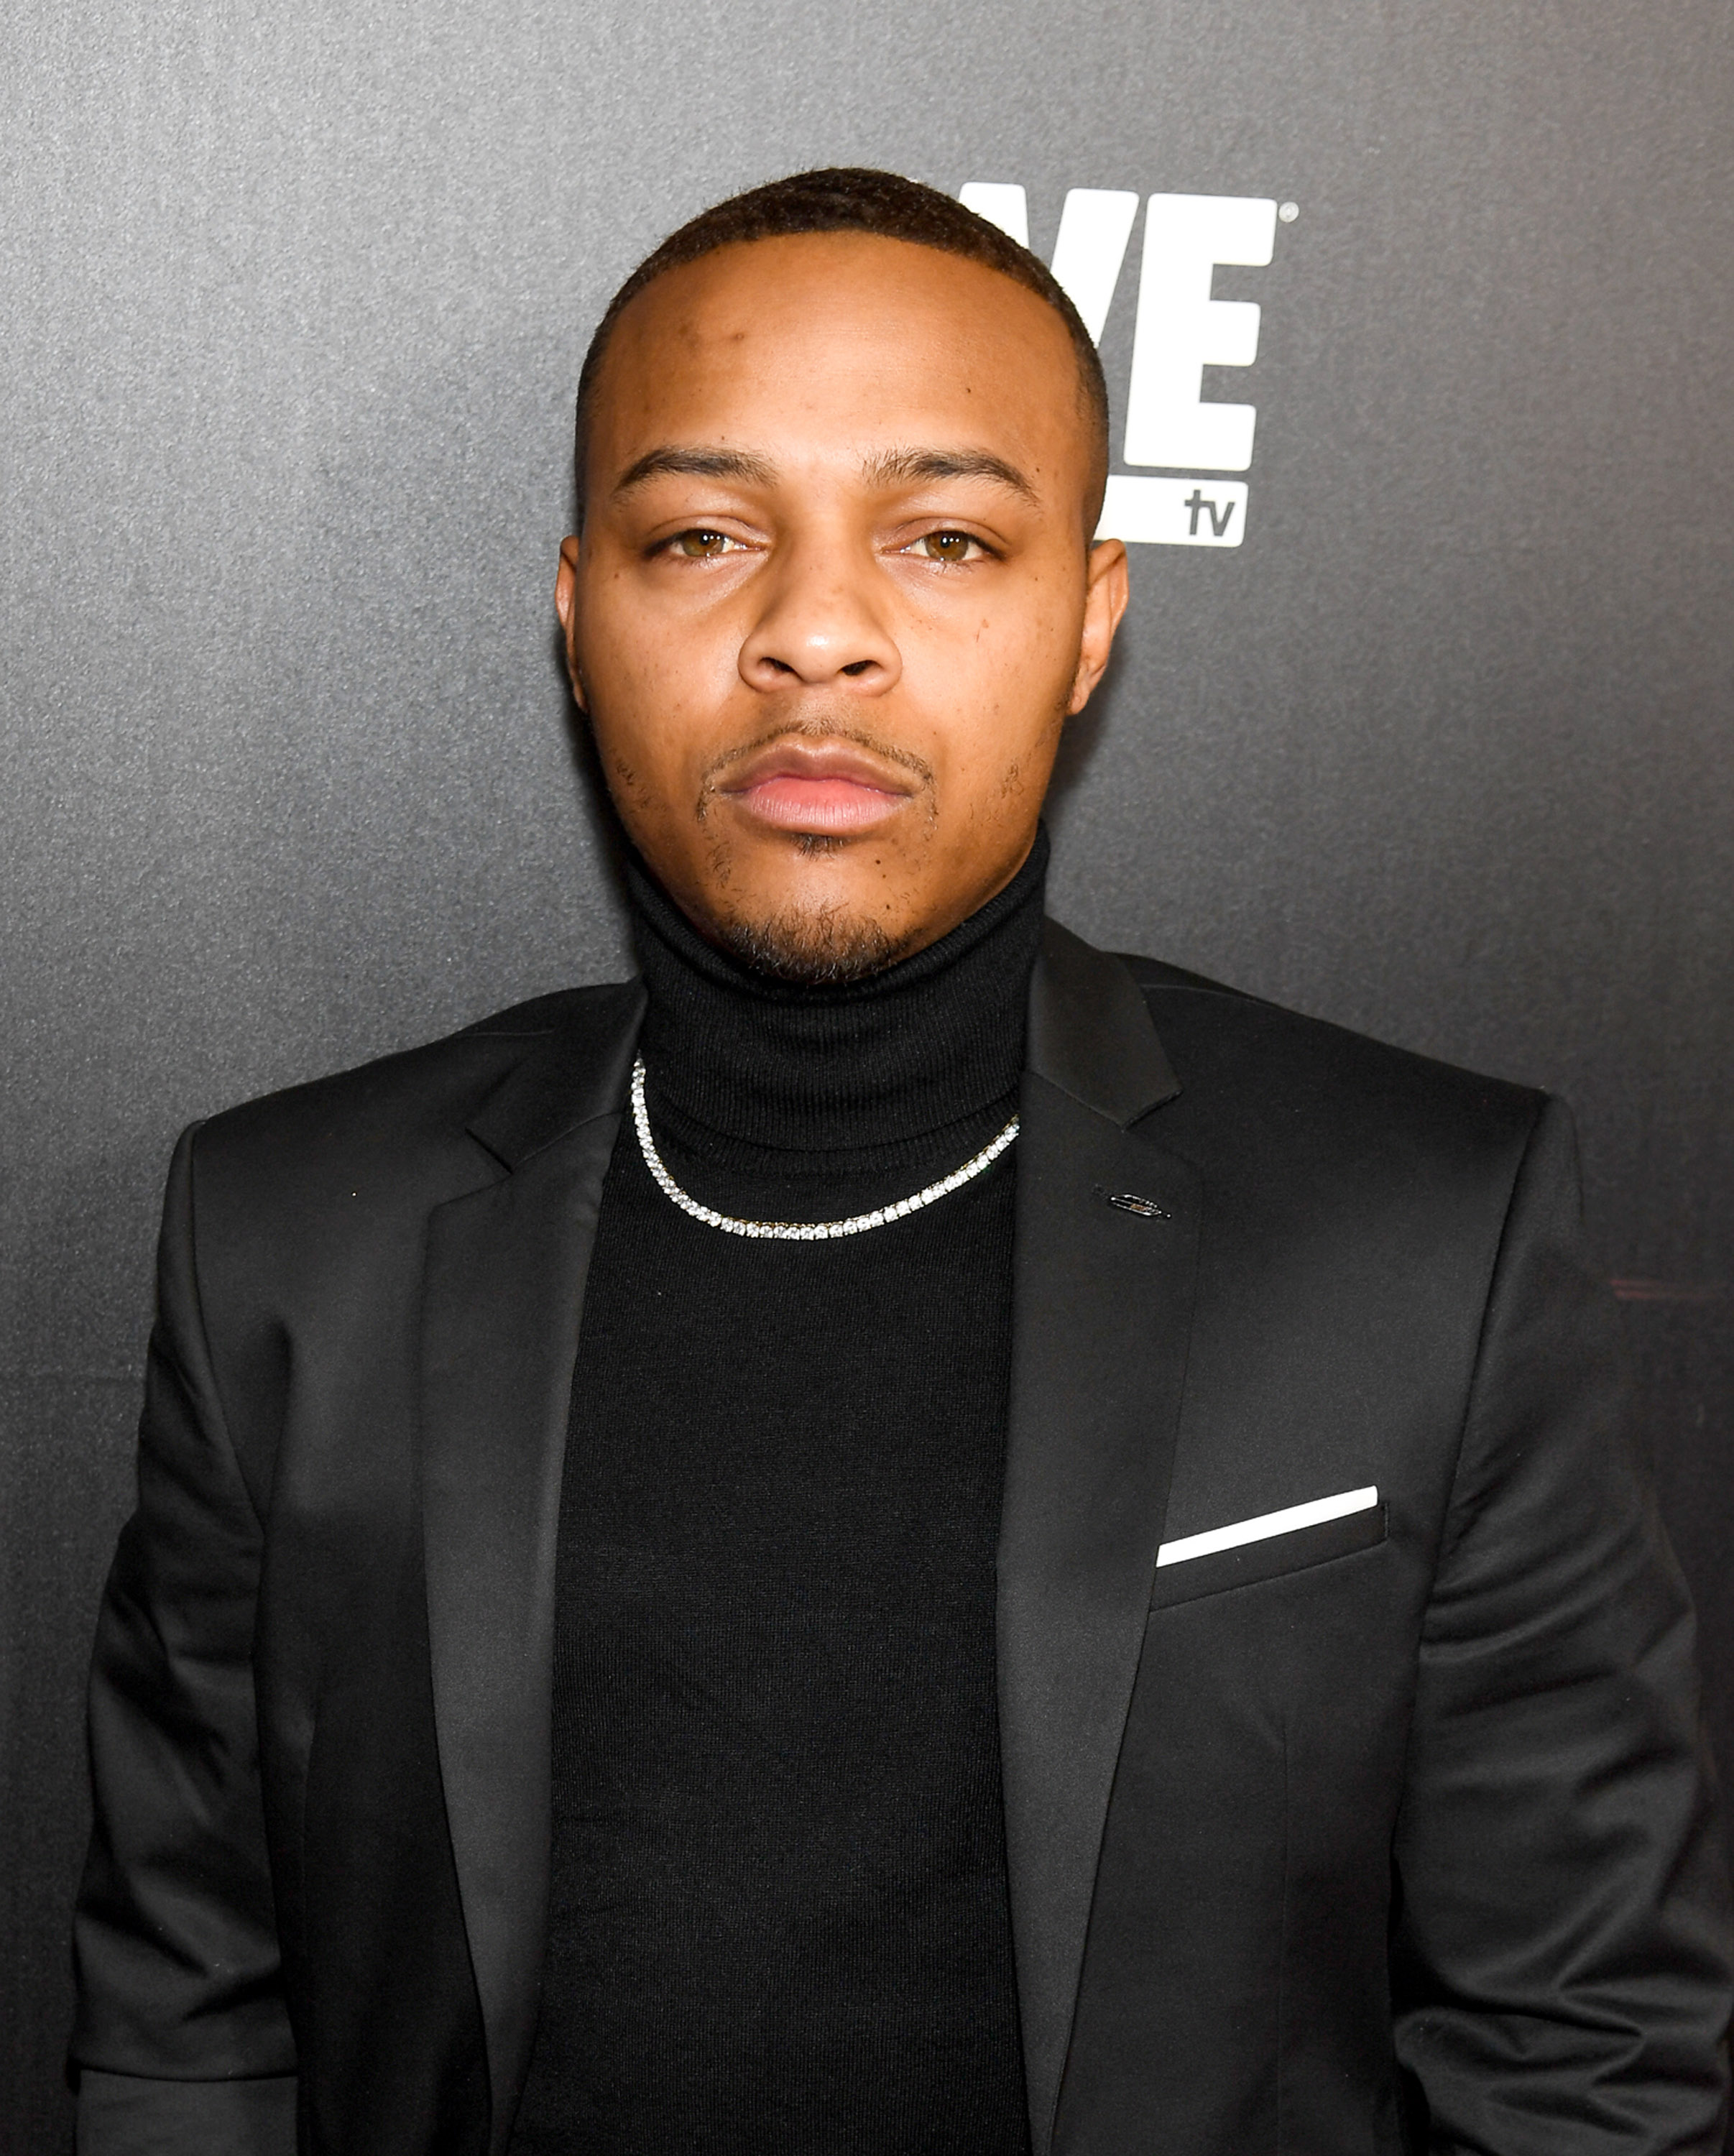 Bow Wow's Dating History: Kiyomi Leslie, Erica Mena And More